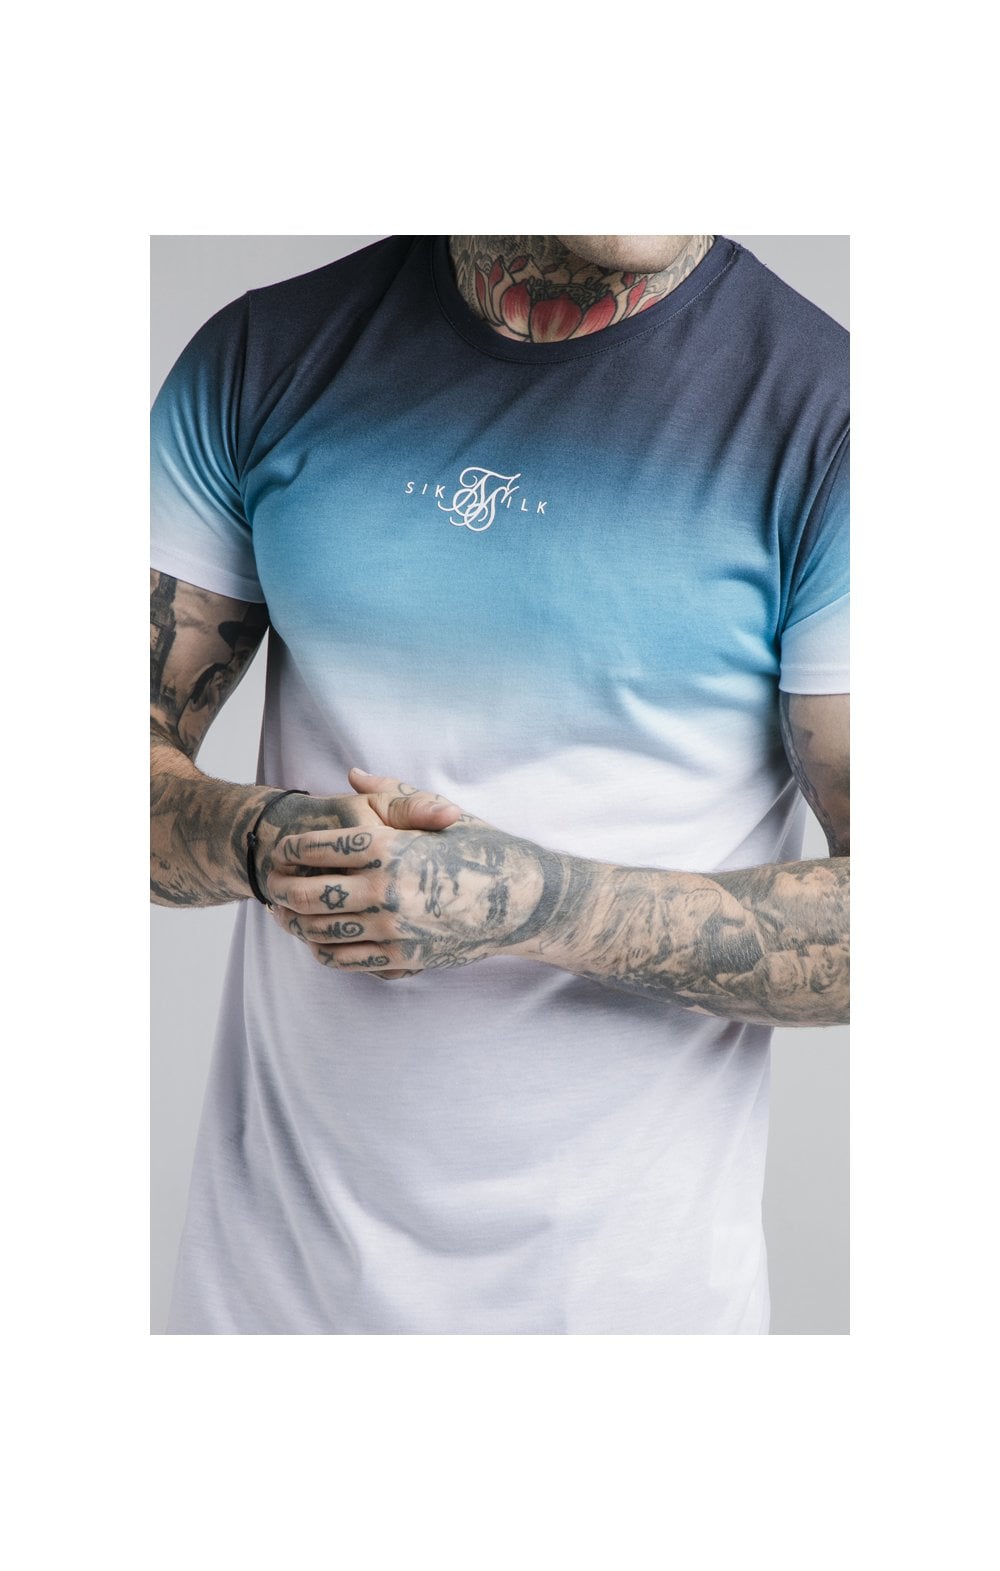 Load image into Gallery viewer, SikSilk S/S High Fade Tee - Navy Neon Teal Fade (1)